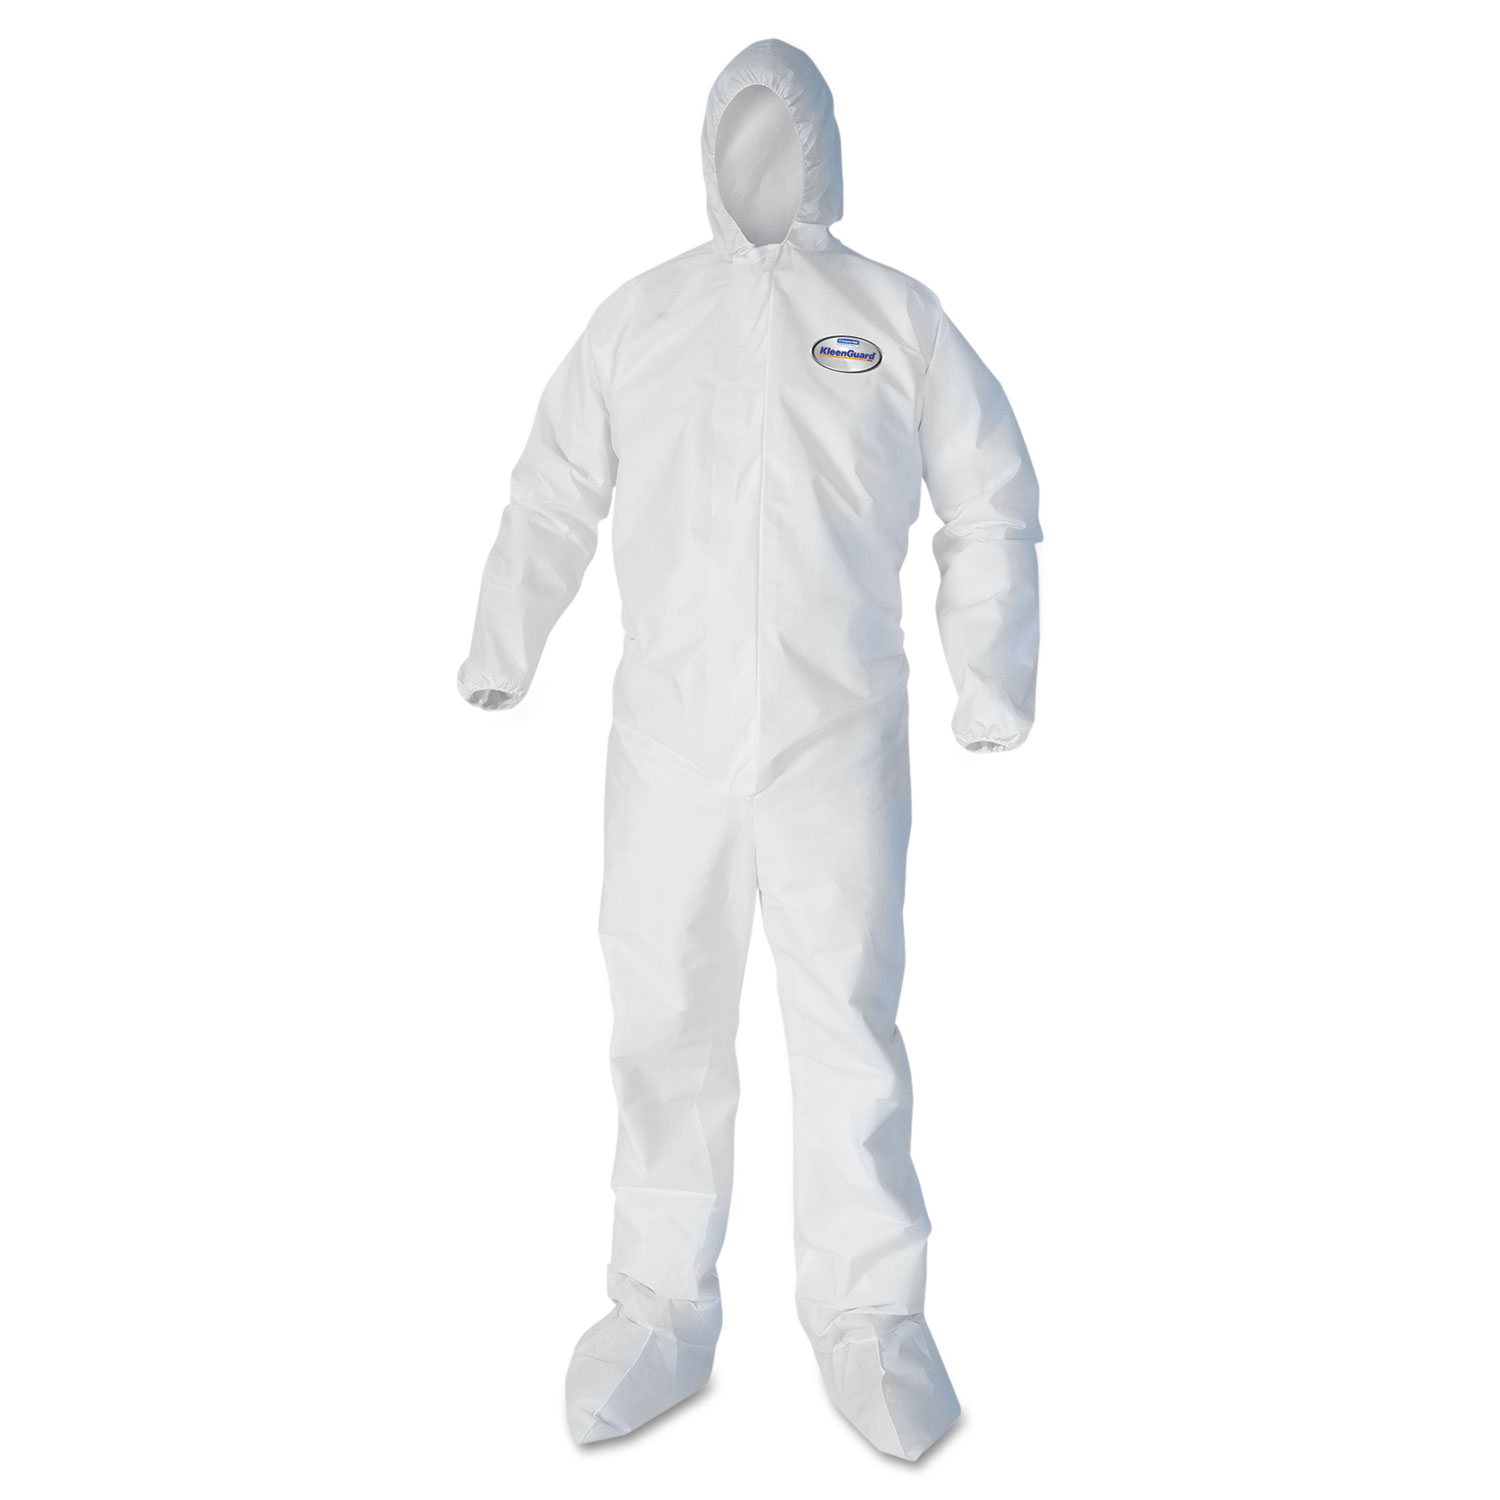 A30 Elastic Back and Cuff Hooded/Boots Coveralls, White, 4X-Large, 21/Carton